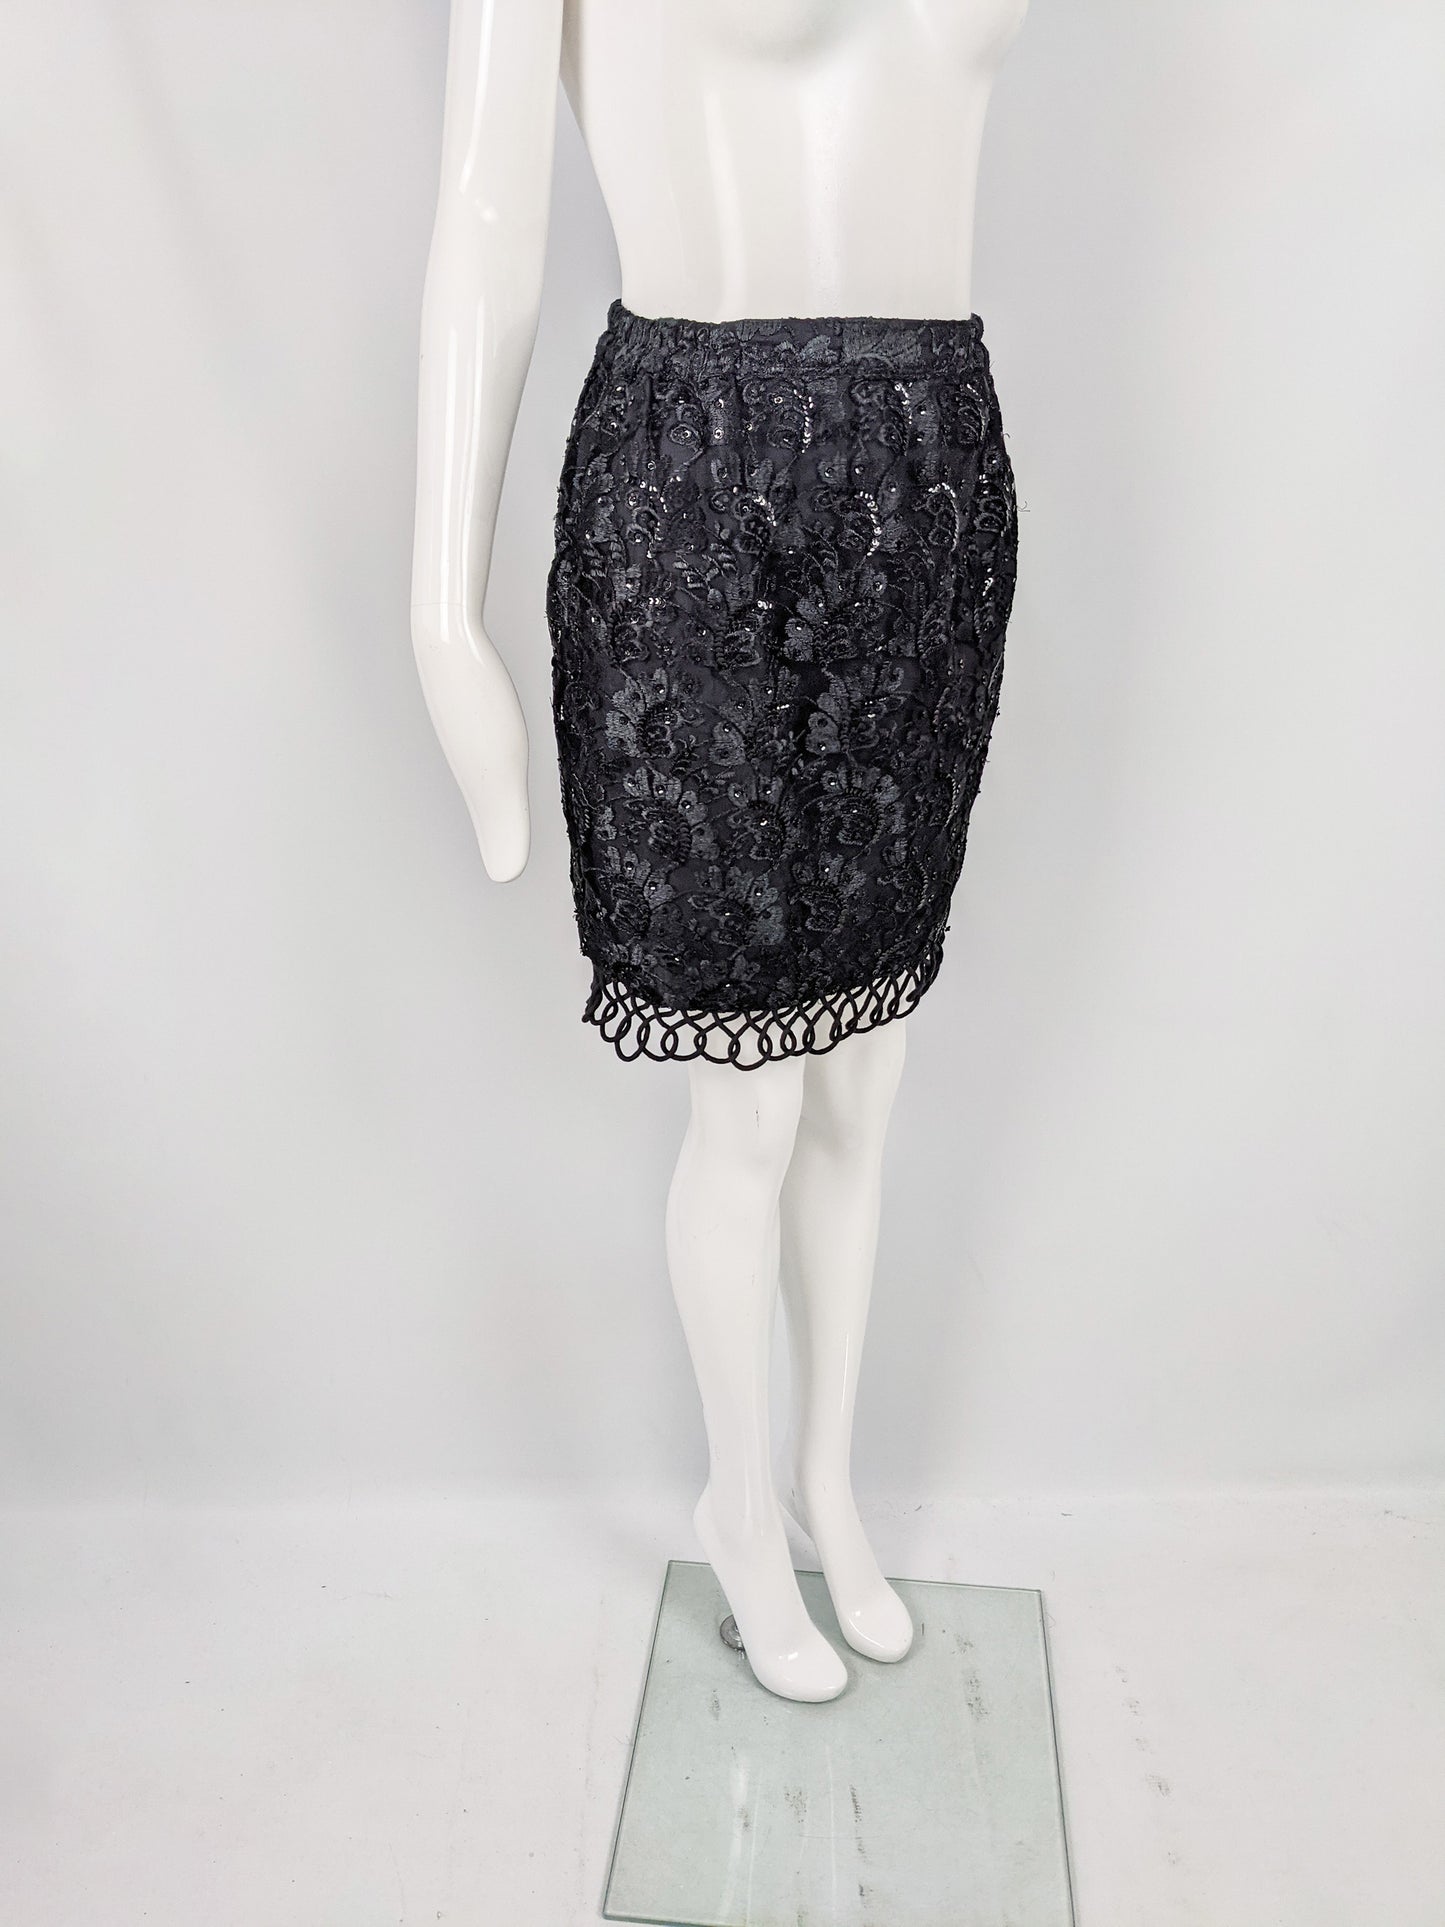 Vintage Black Embroidered Lace & Sequin Party Skirt, 1980s